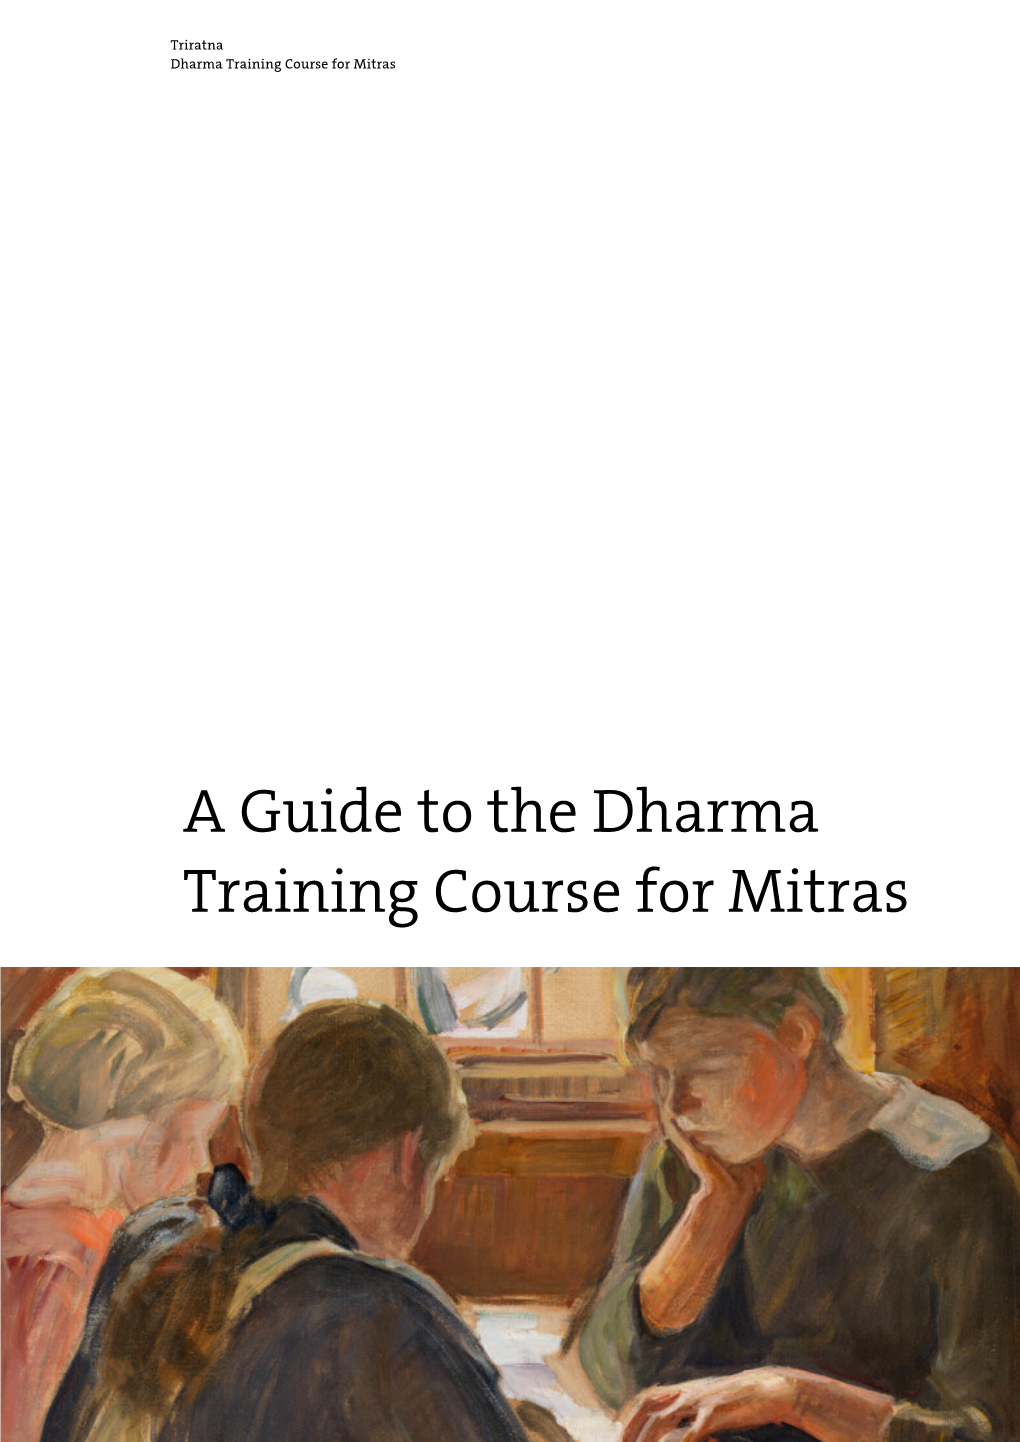 A Guide to the Dharma Training Course for Mitras